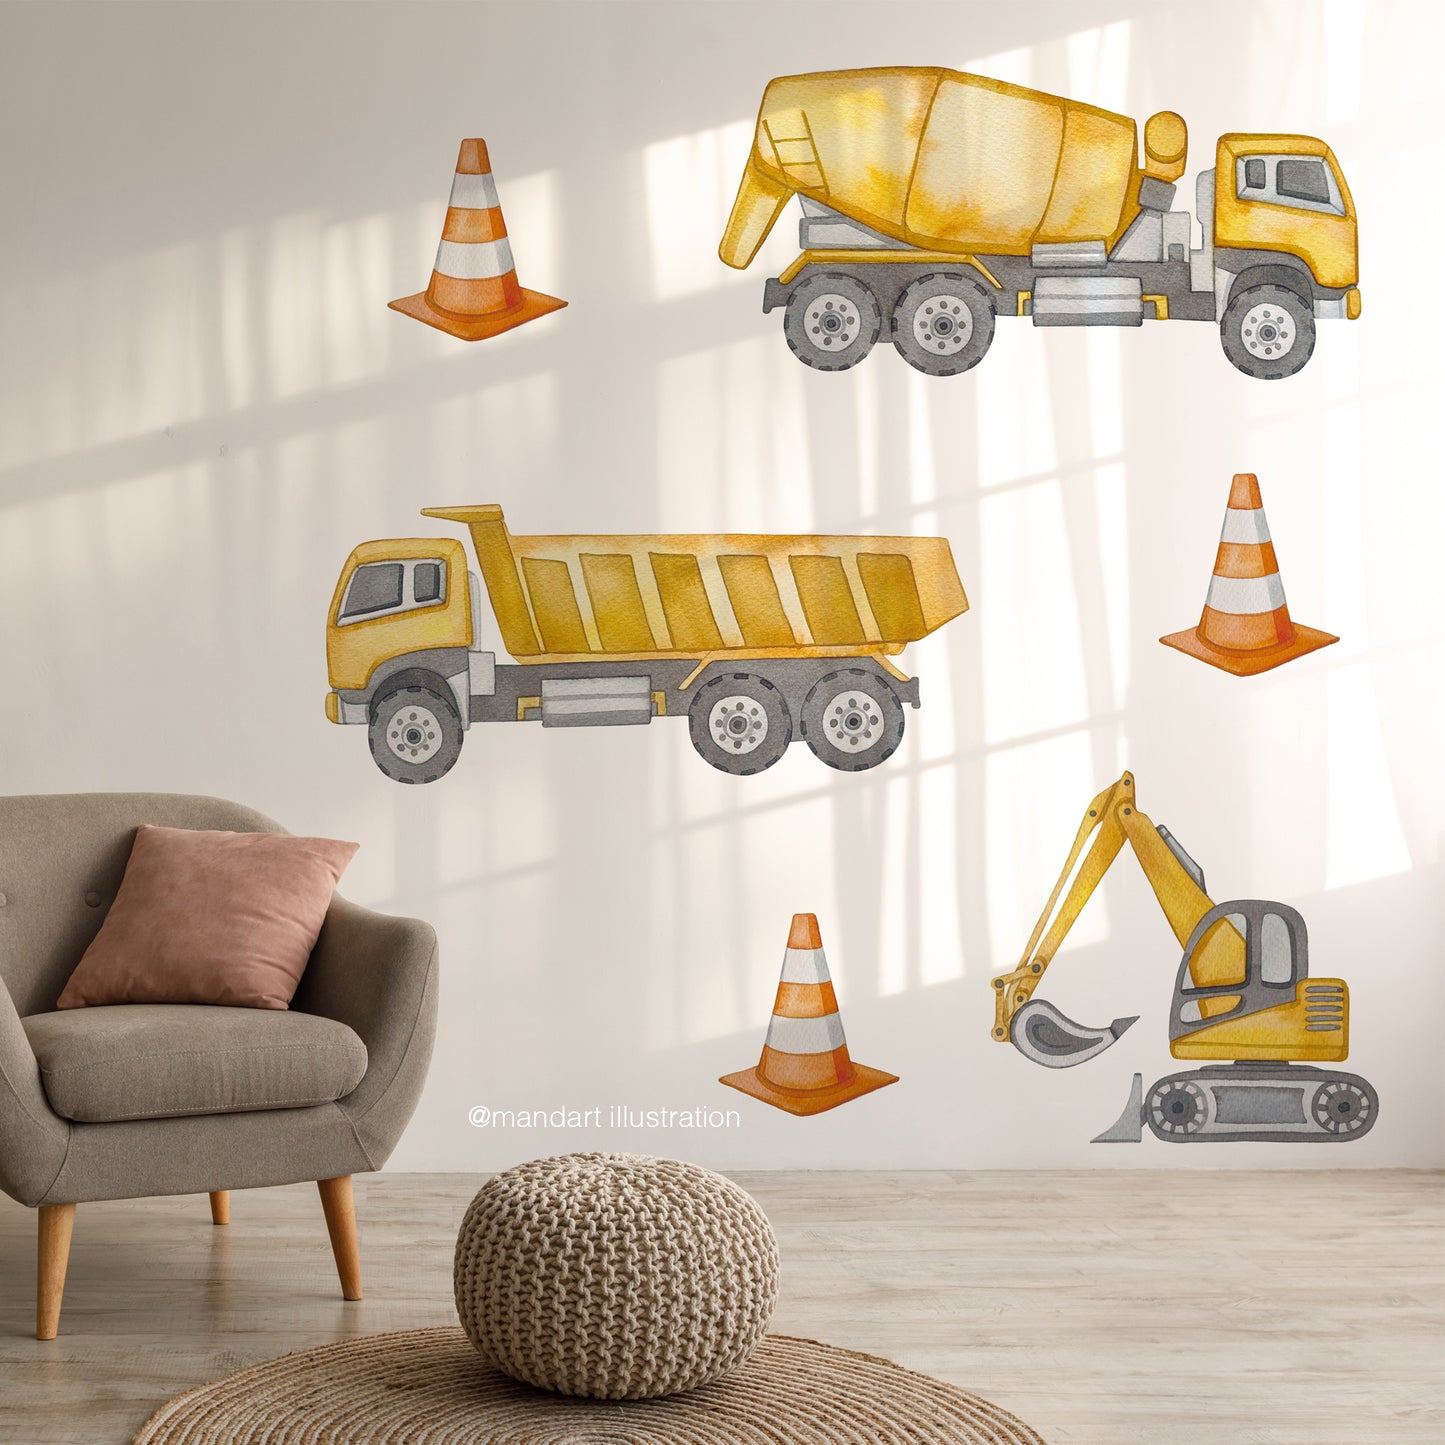 Construction trucks removable and reusable wall decal